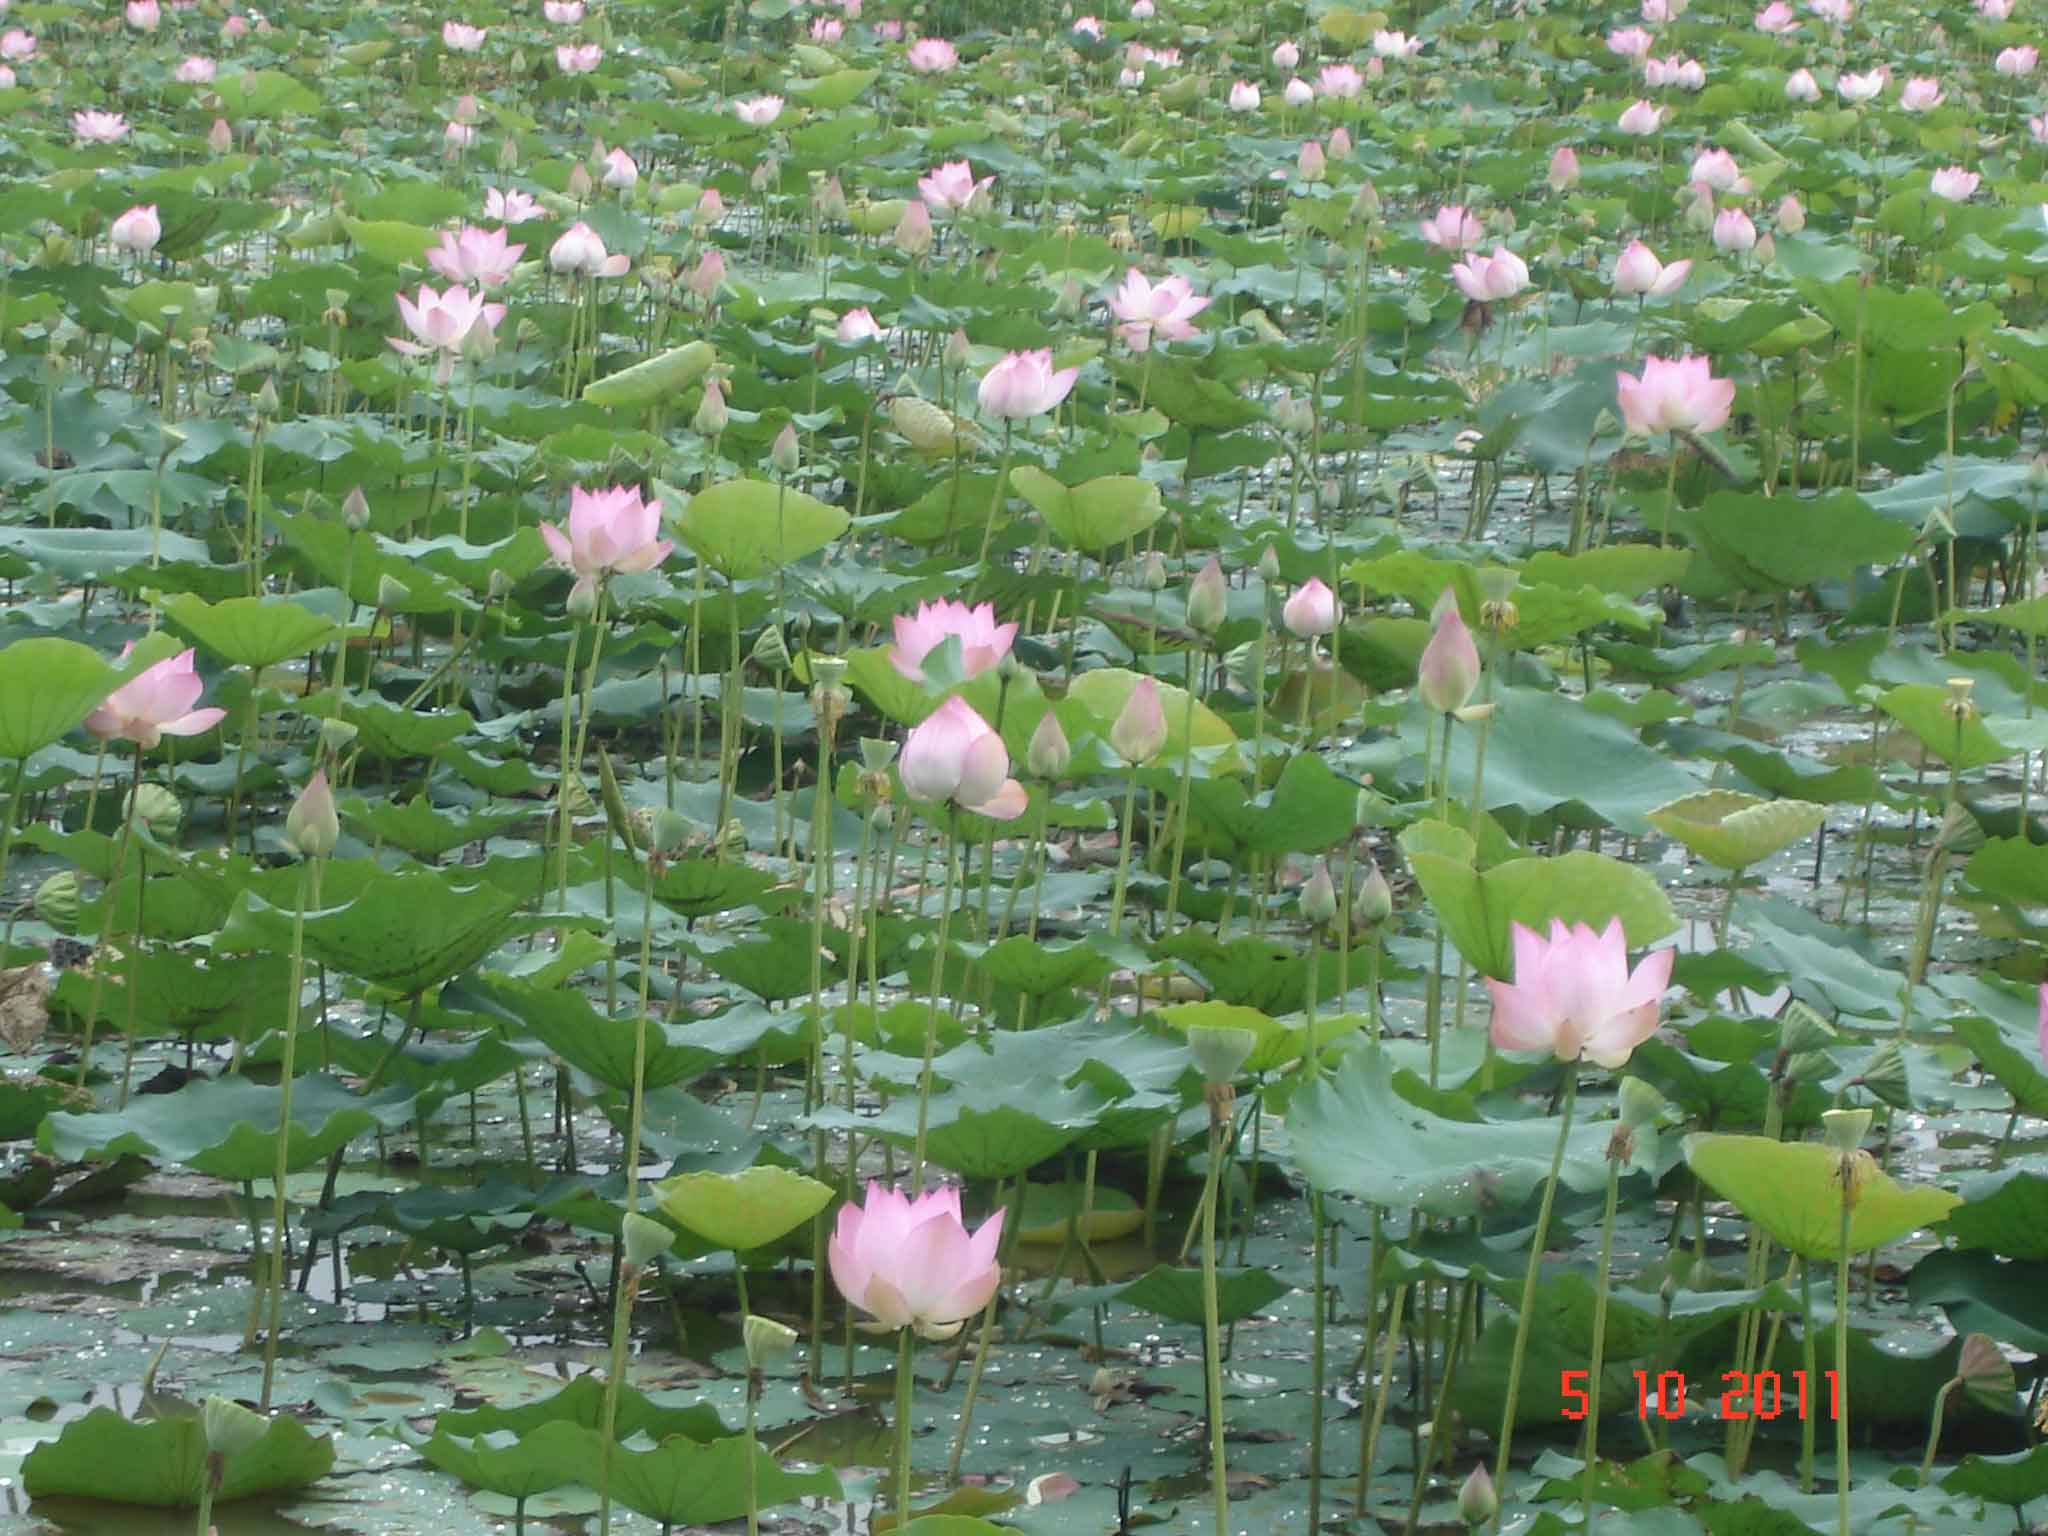 Field-of-delicate-lotus-blossoms along the Highway